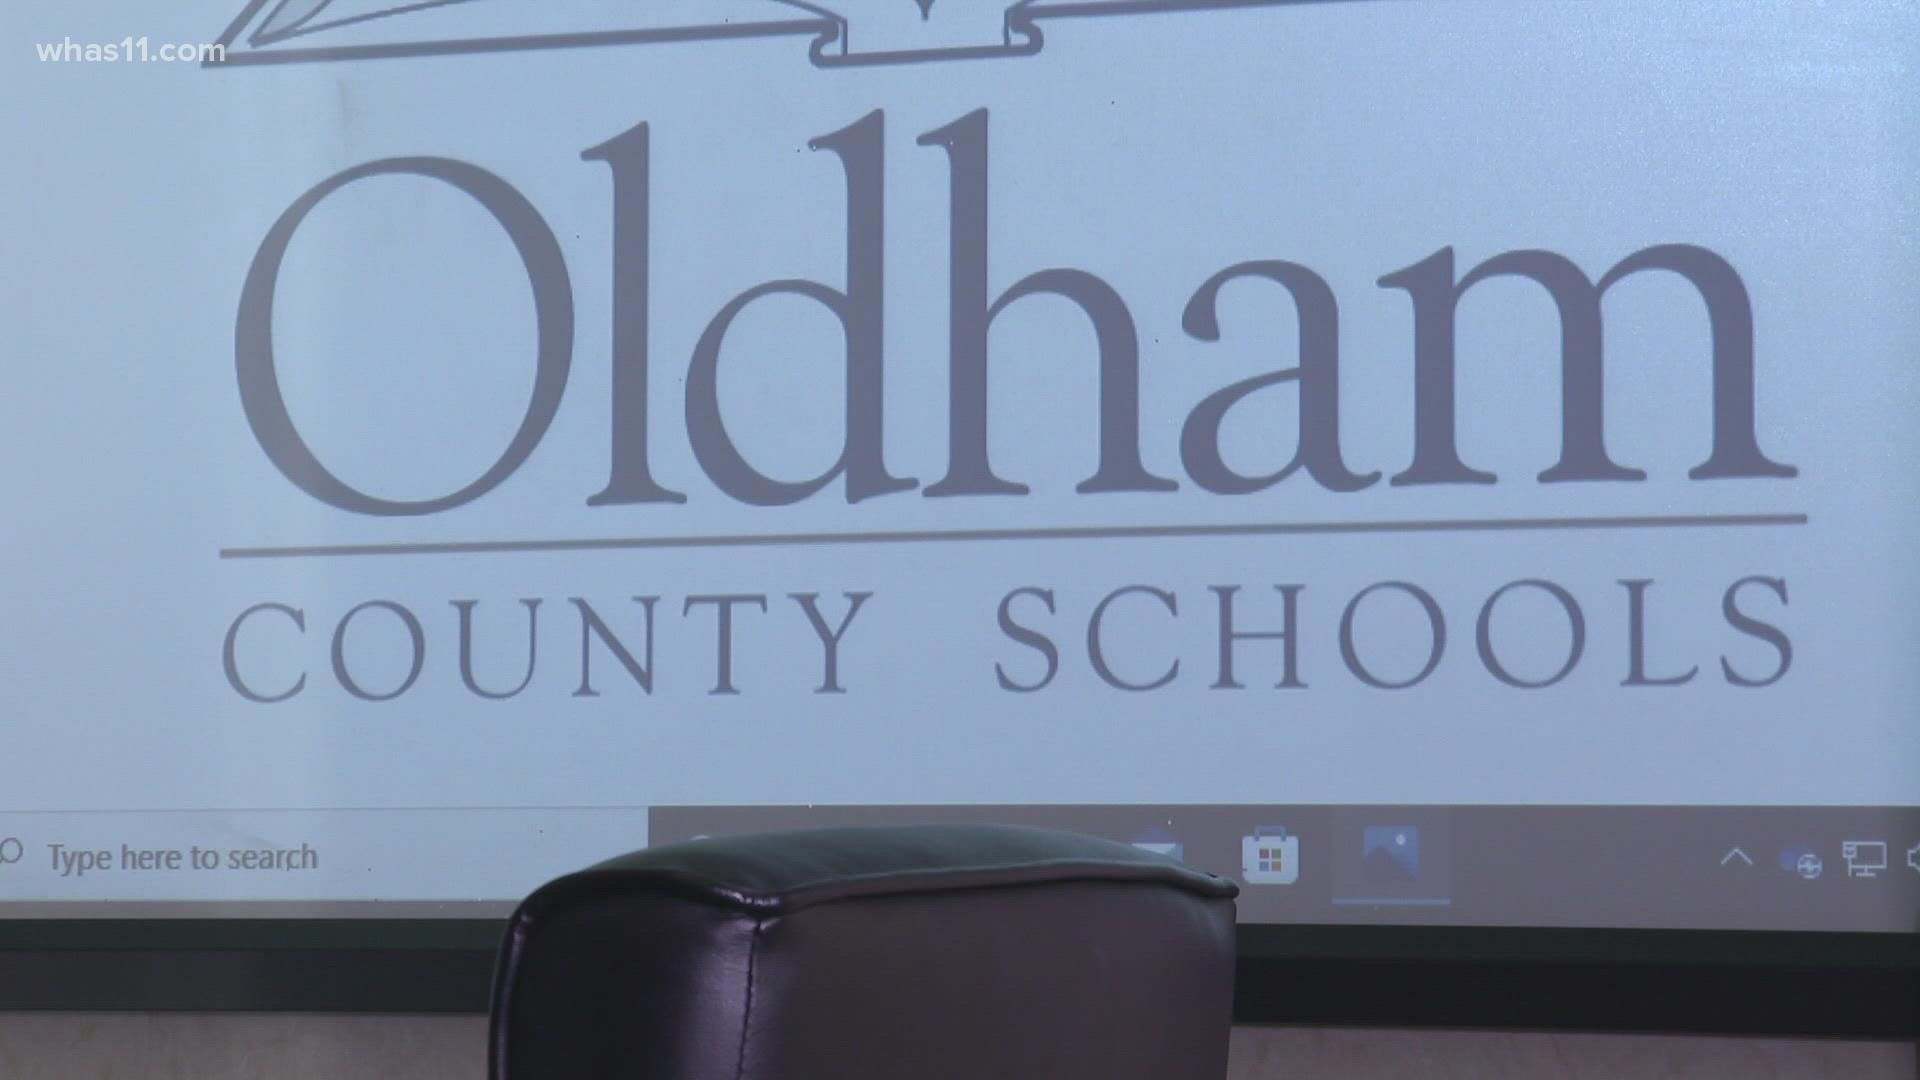 A couple of weeks ago, Oldham County's school board adopted new state guidelines to keep more kids and staff in the classroom.